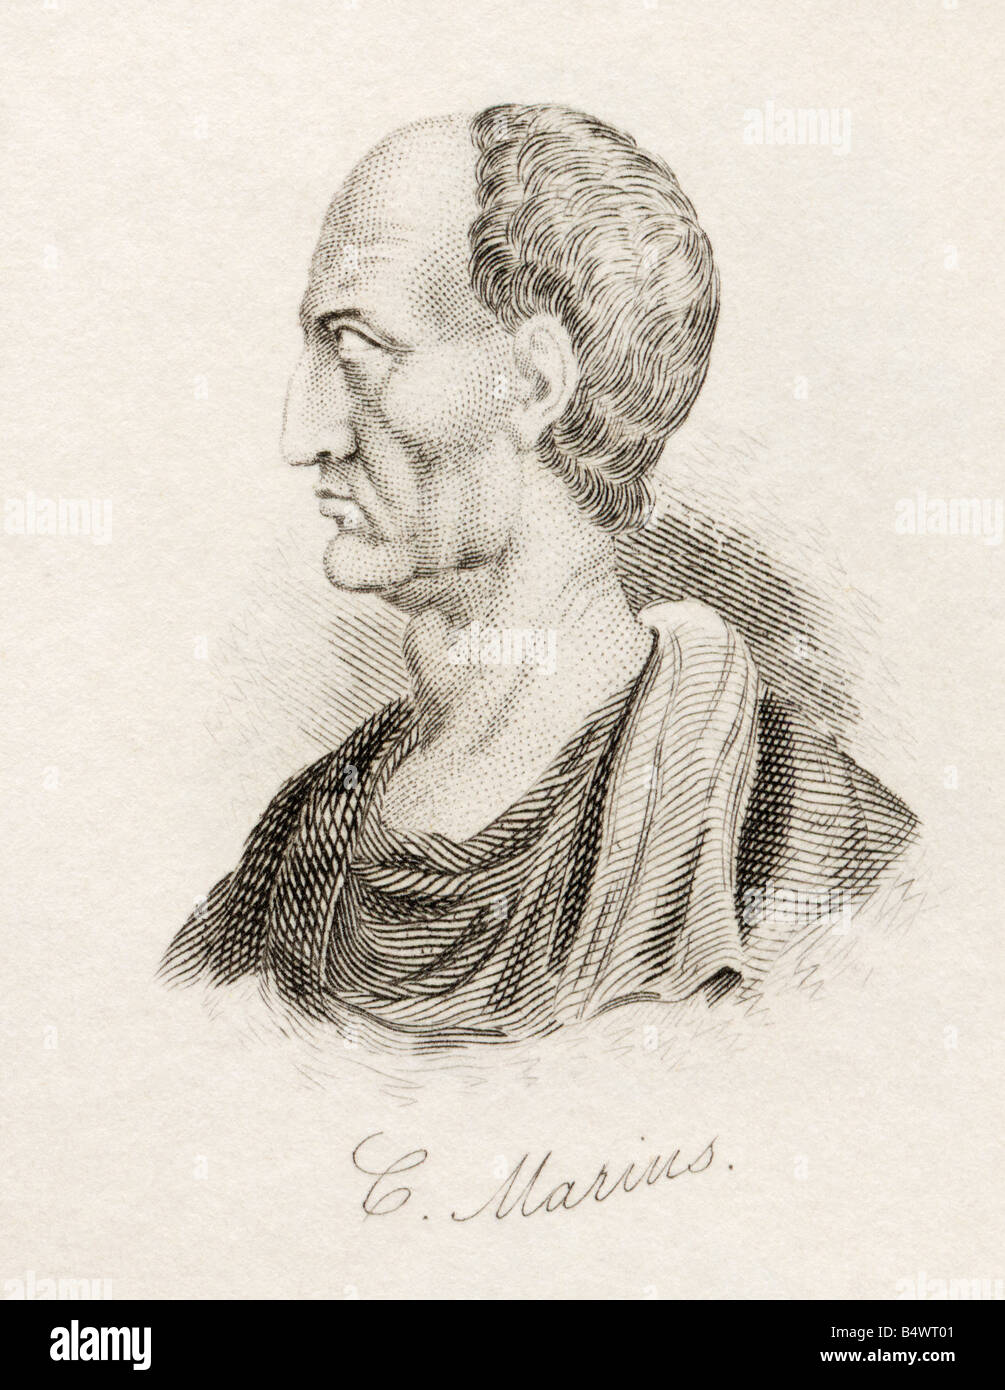 Gaius Marius, 157 BC - 86 BC. Roman general and politician. From the book Crabbs Historical Dictionary, published 1825. Stock Photo